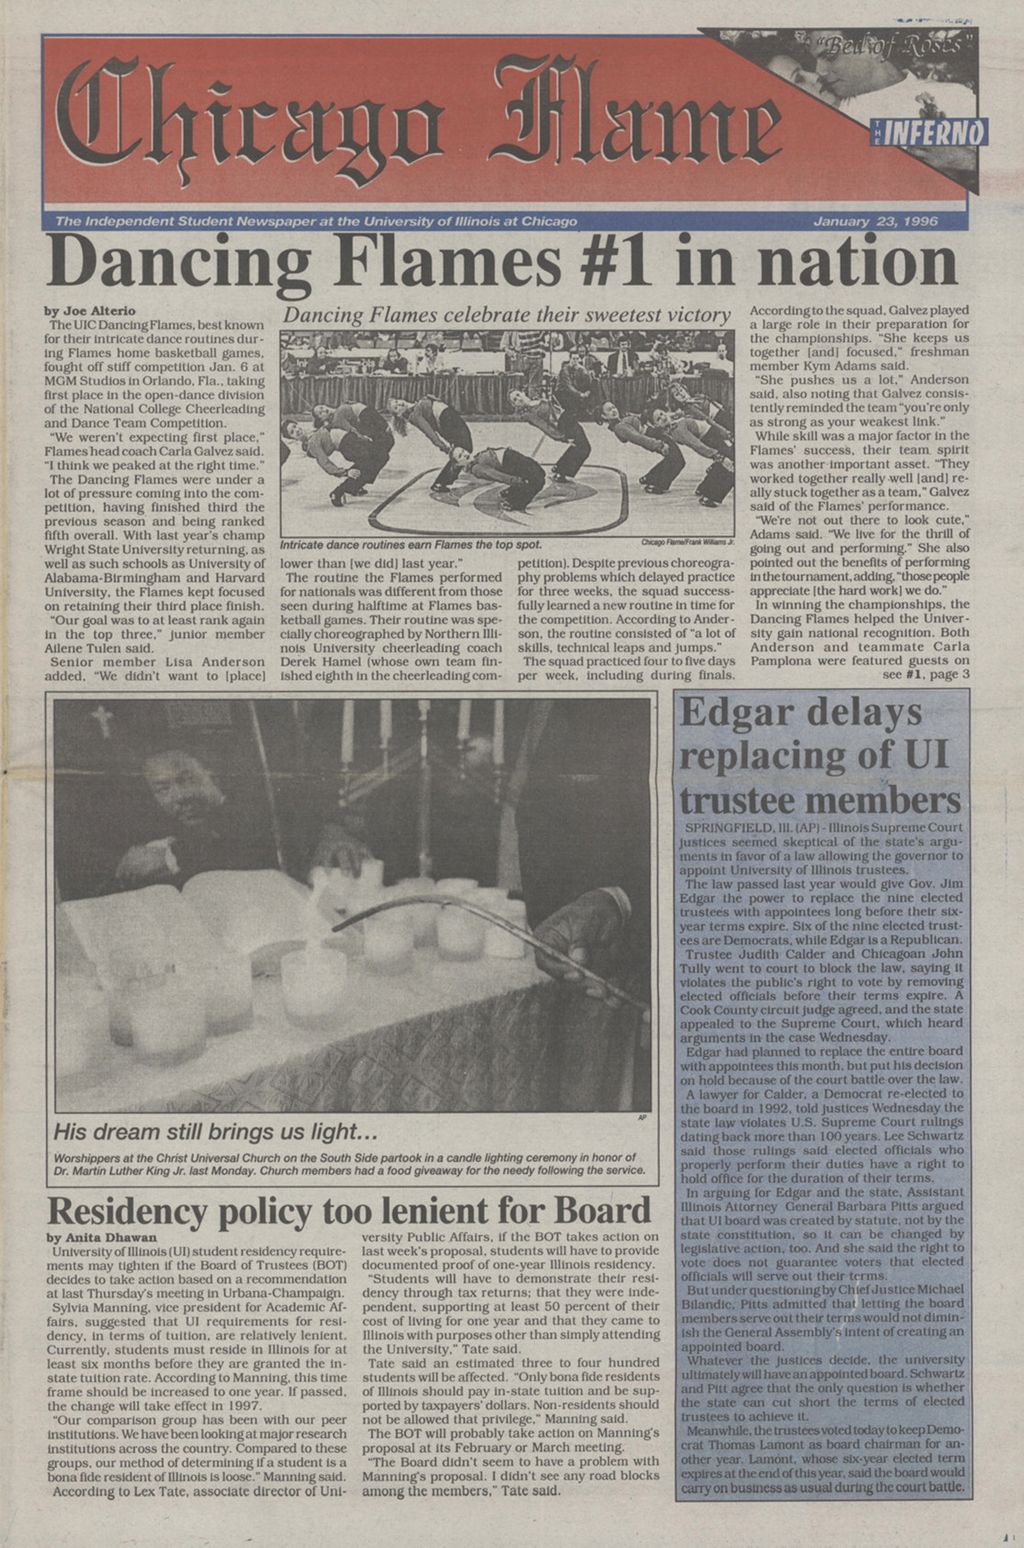 Miniature of Chicago Flame (January 23, 1996)